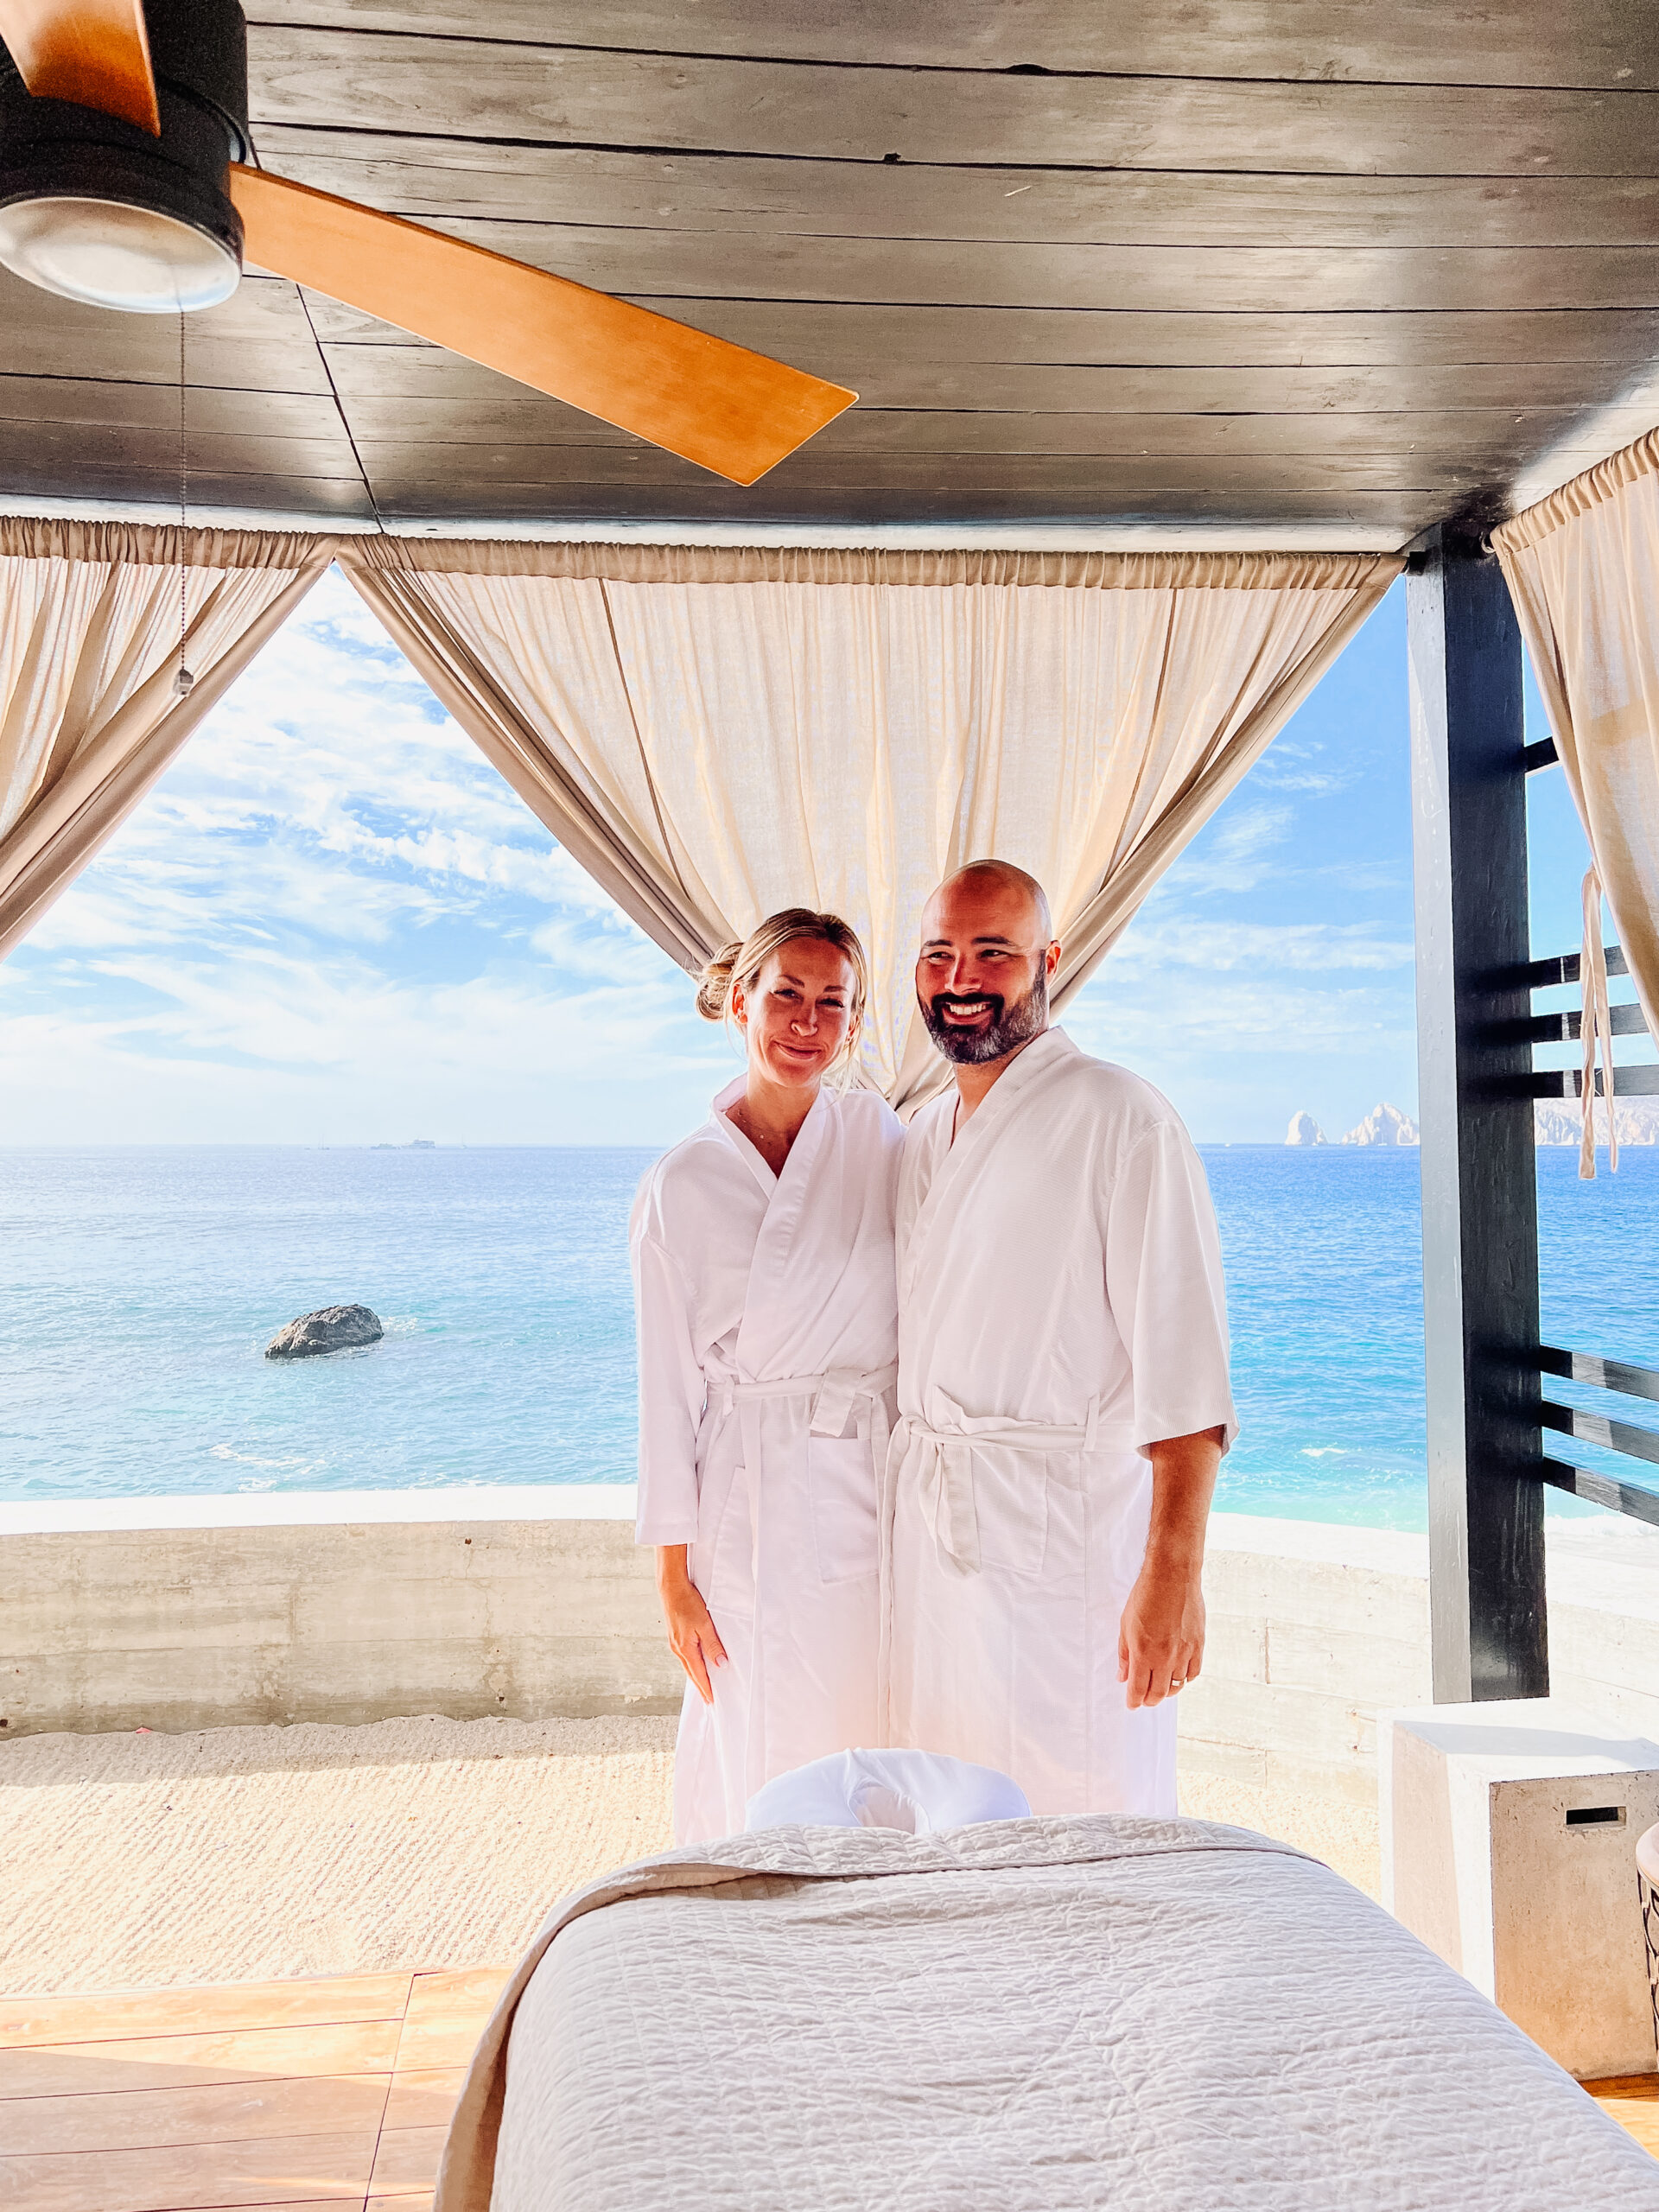 couples massage with a stunning view in Cabo San Lucas, Mexico #couplesmassage #couplestime